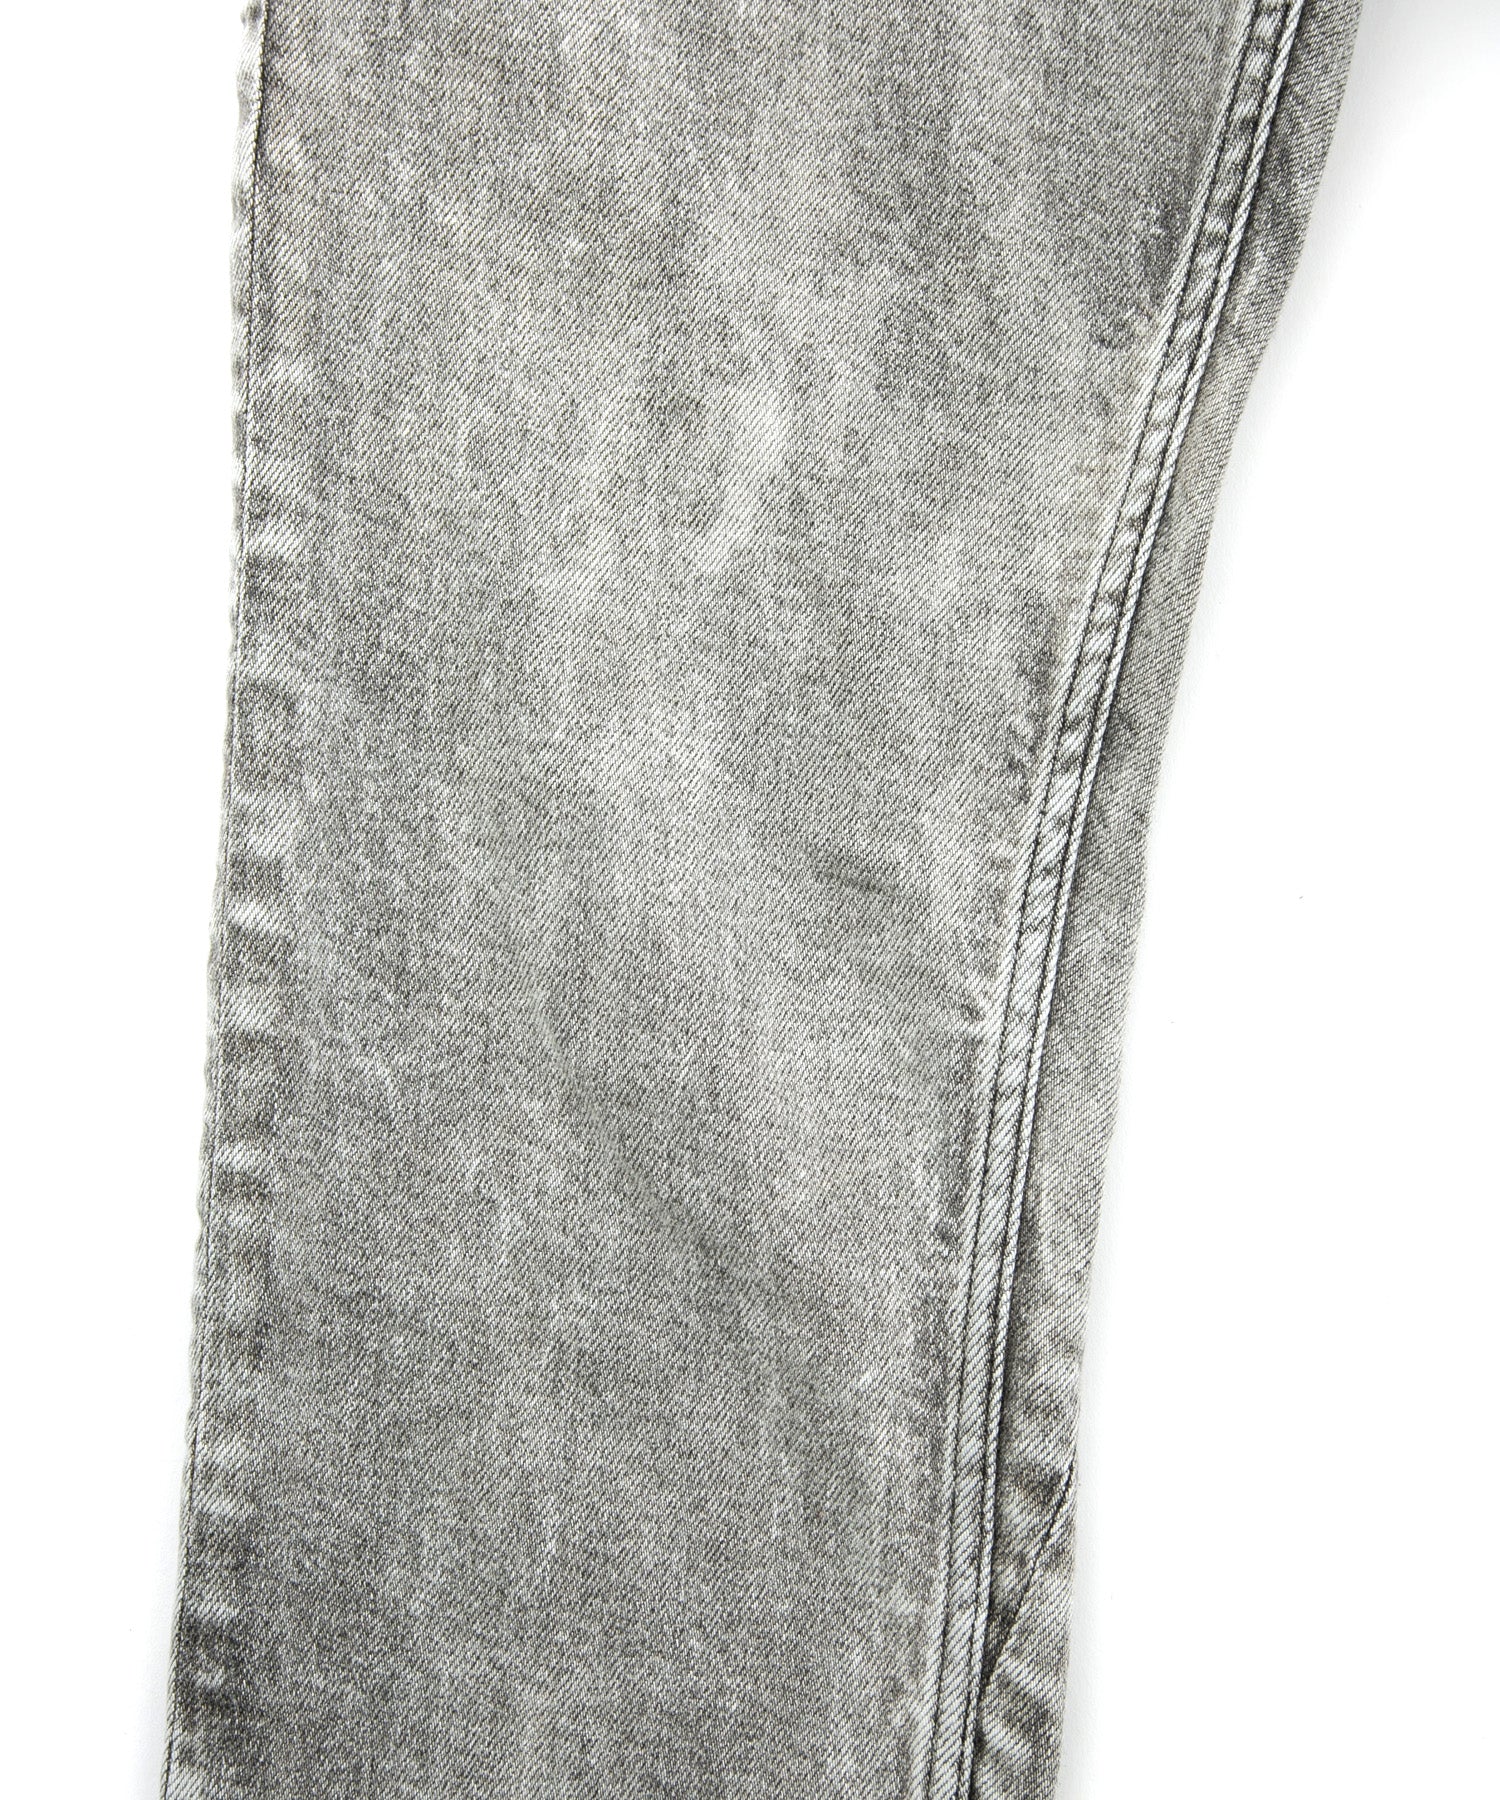 Load image into Gallery viewer, 11oz Organic Cotton Stretch Denim Tight Straight Jeans / WHITE